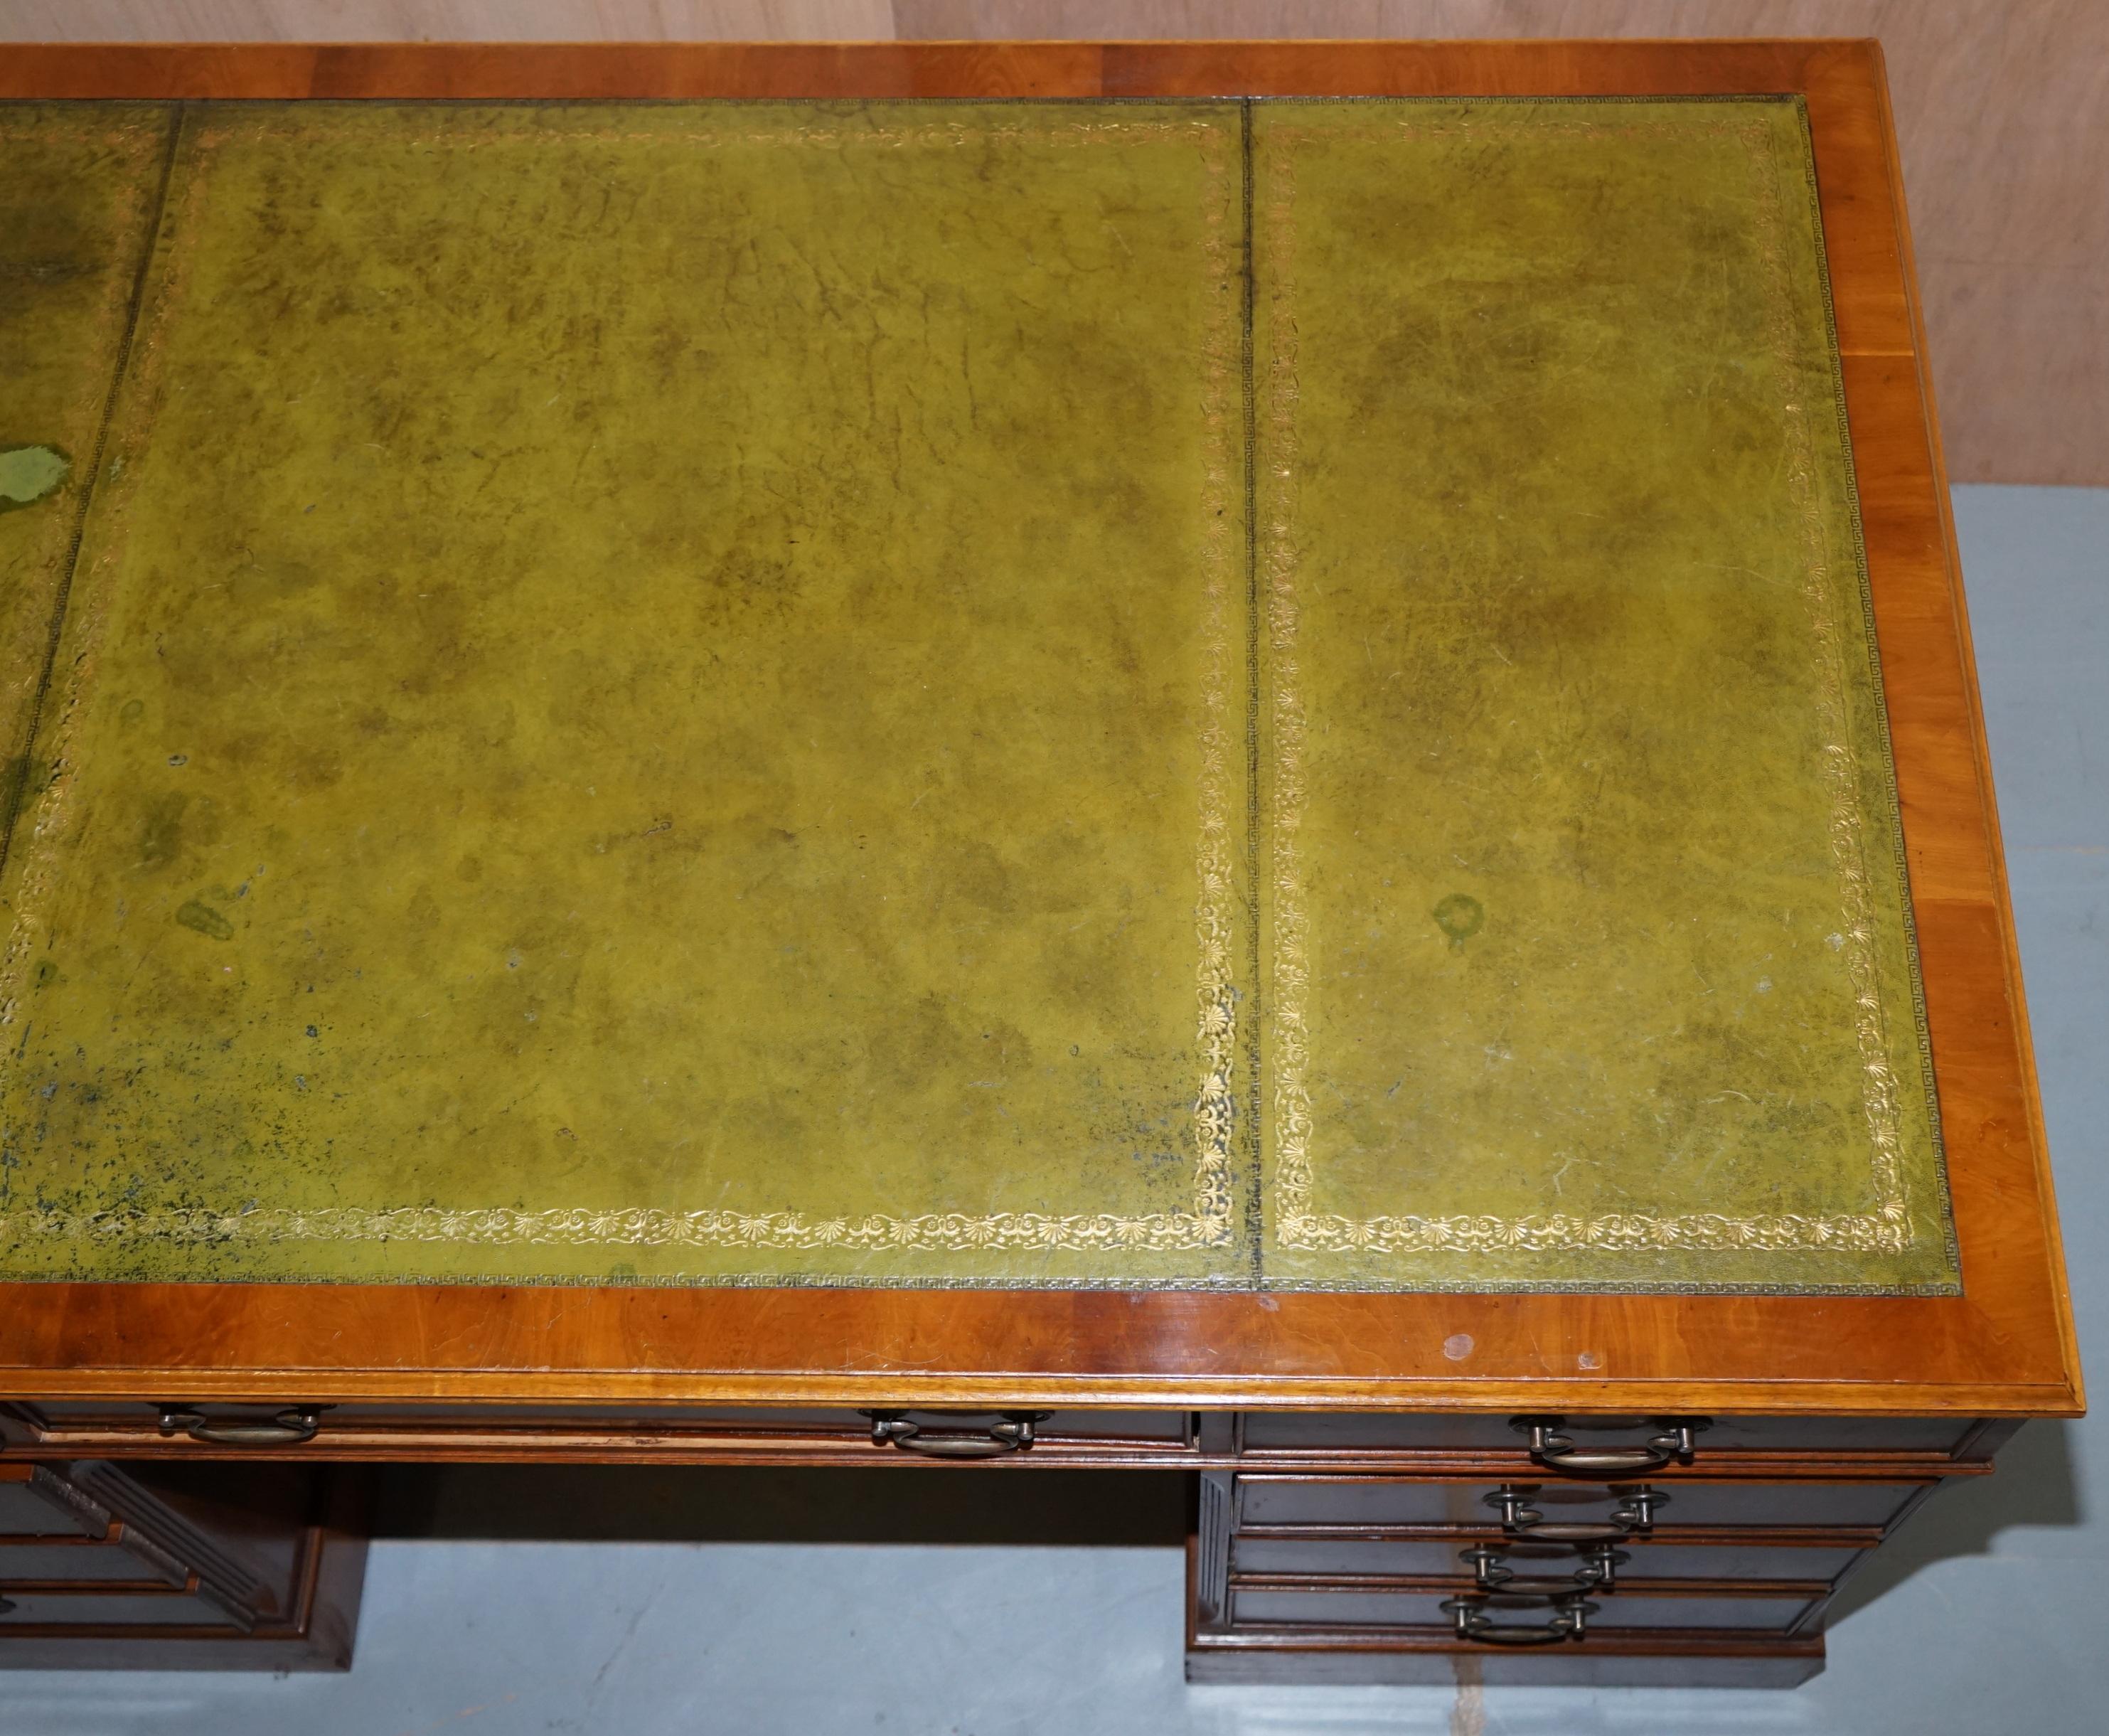 Hand-Crafted Medium Yew Wood Twin Pedestal Partner Desk Green Leather Gold Leaf Embossed Top